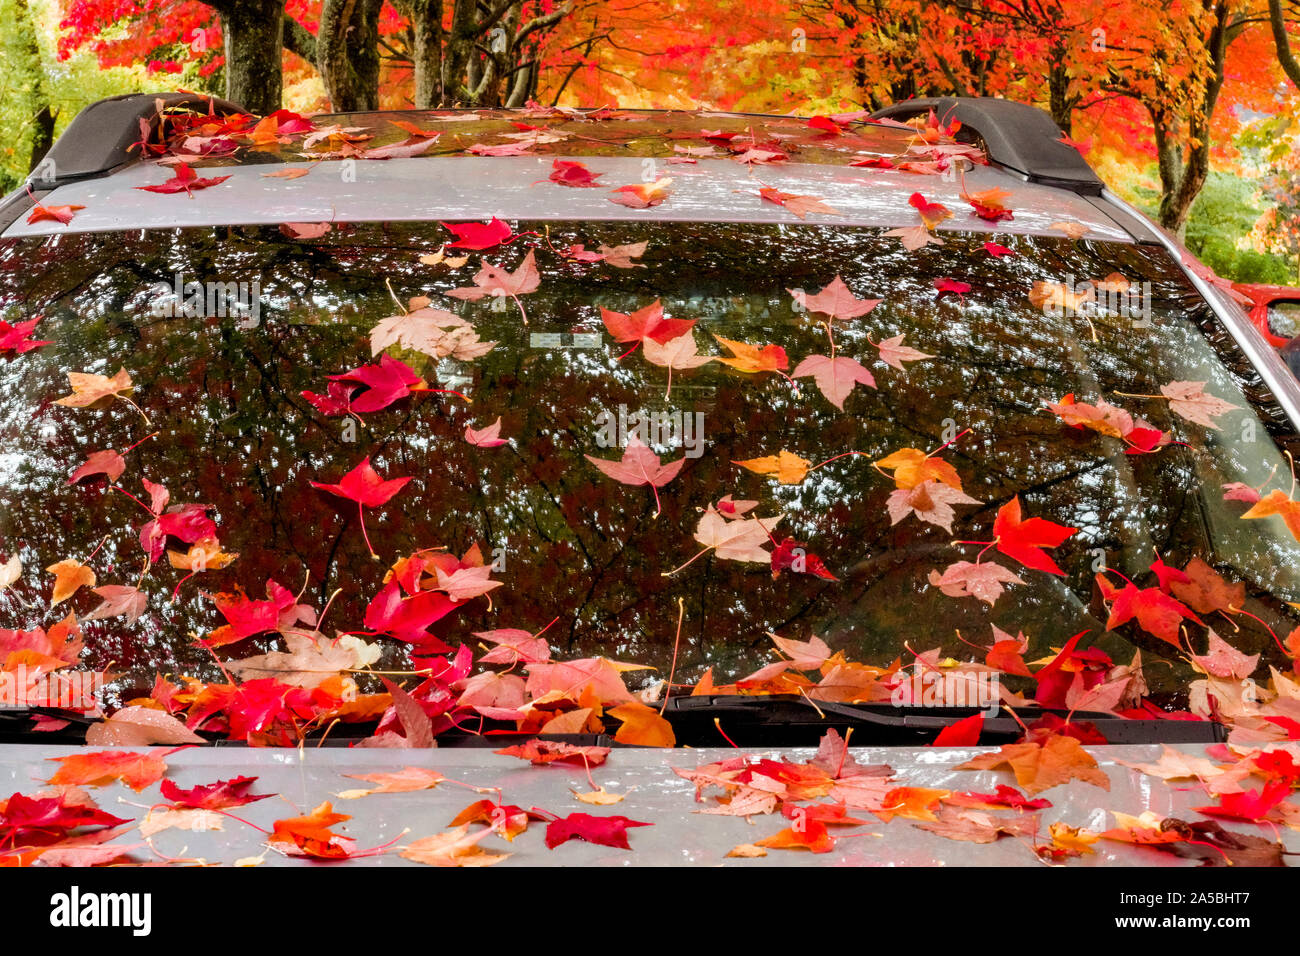 Autumn drops colourful leaves on parked car. Stock Photo